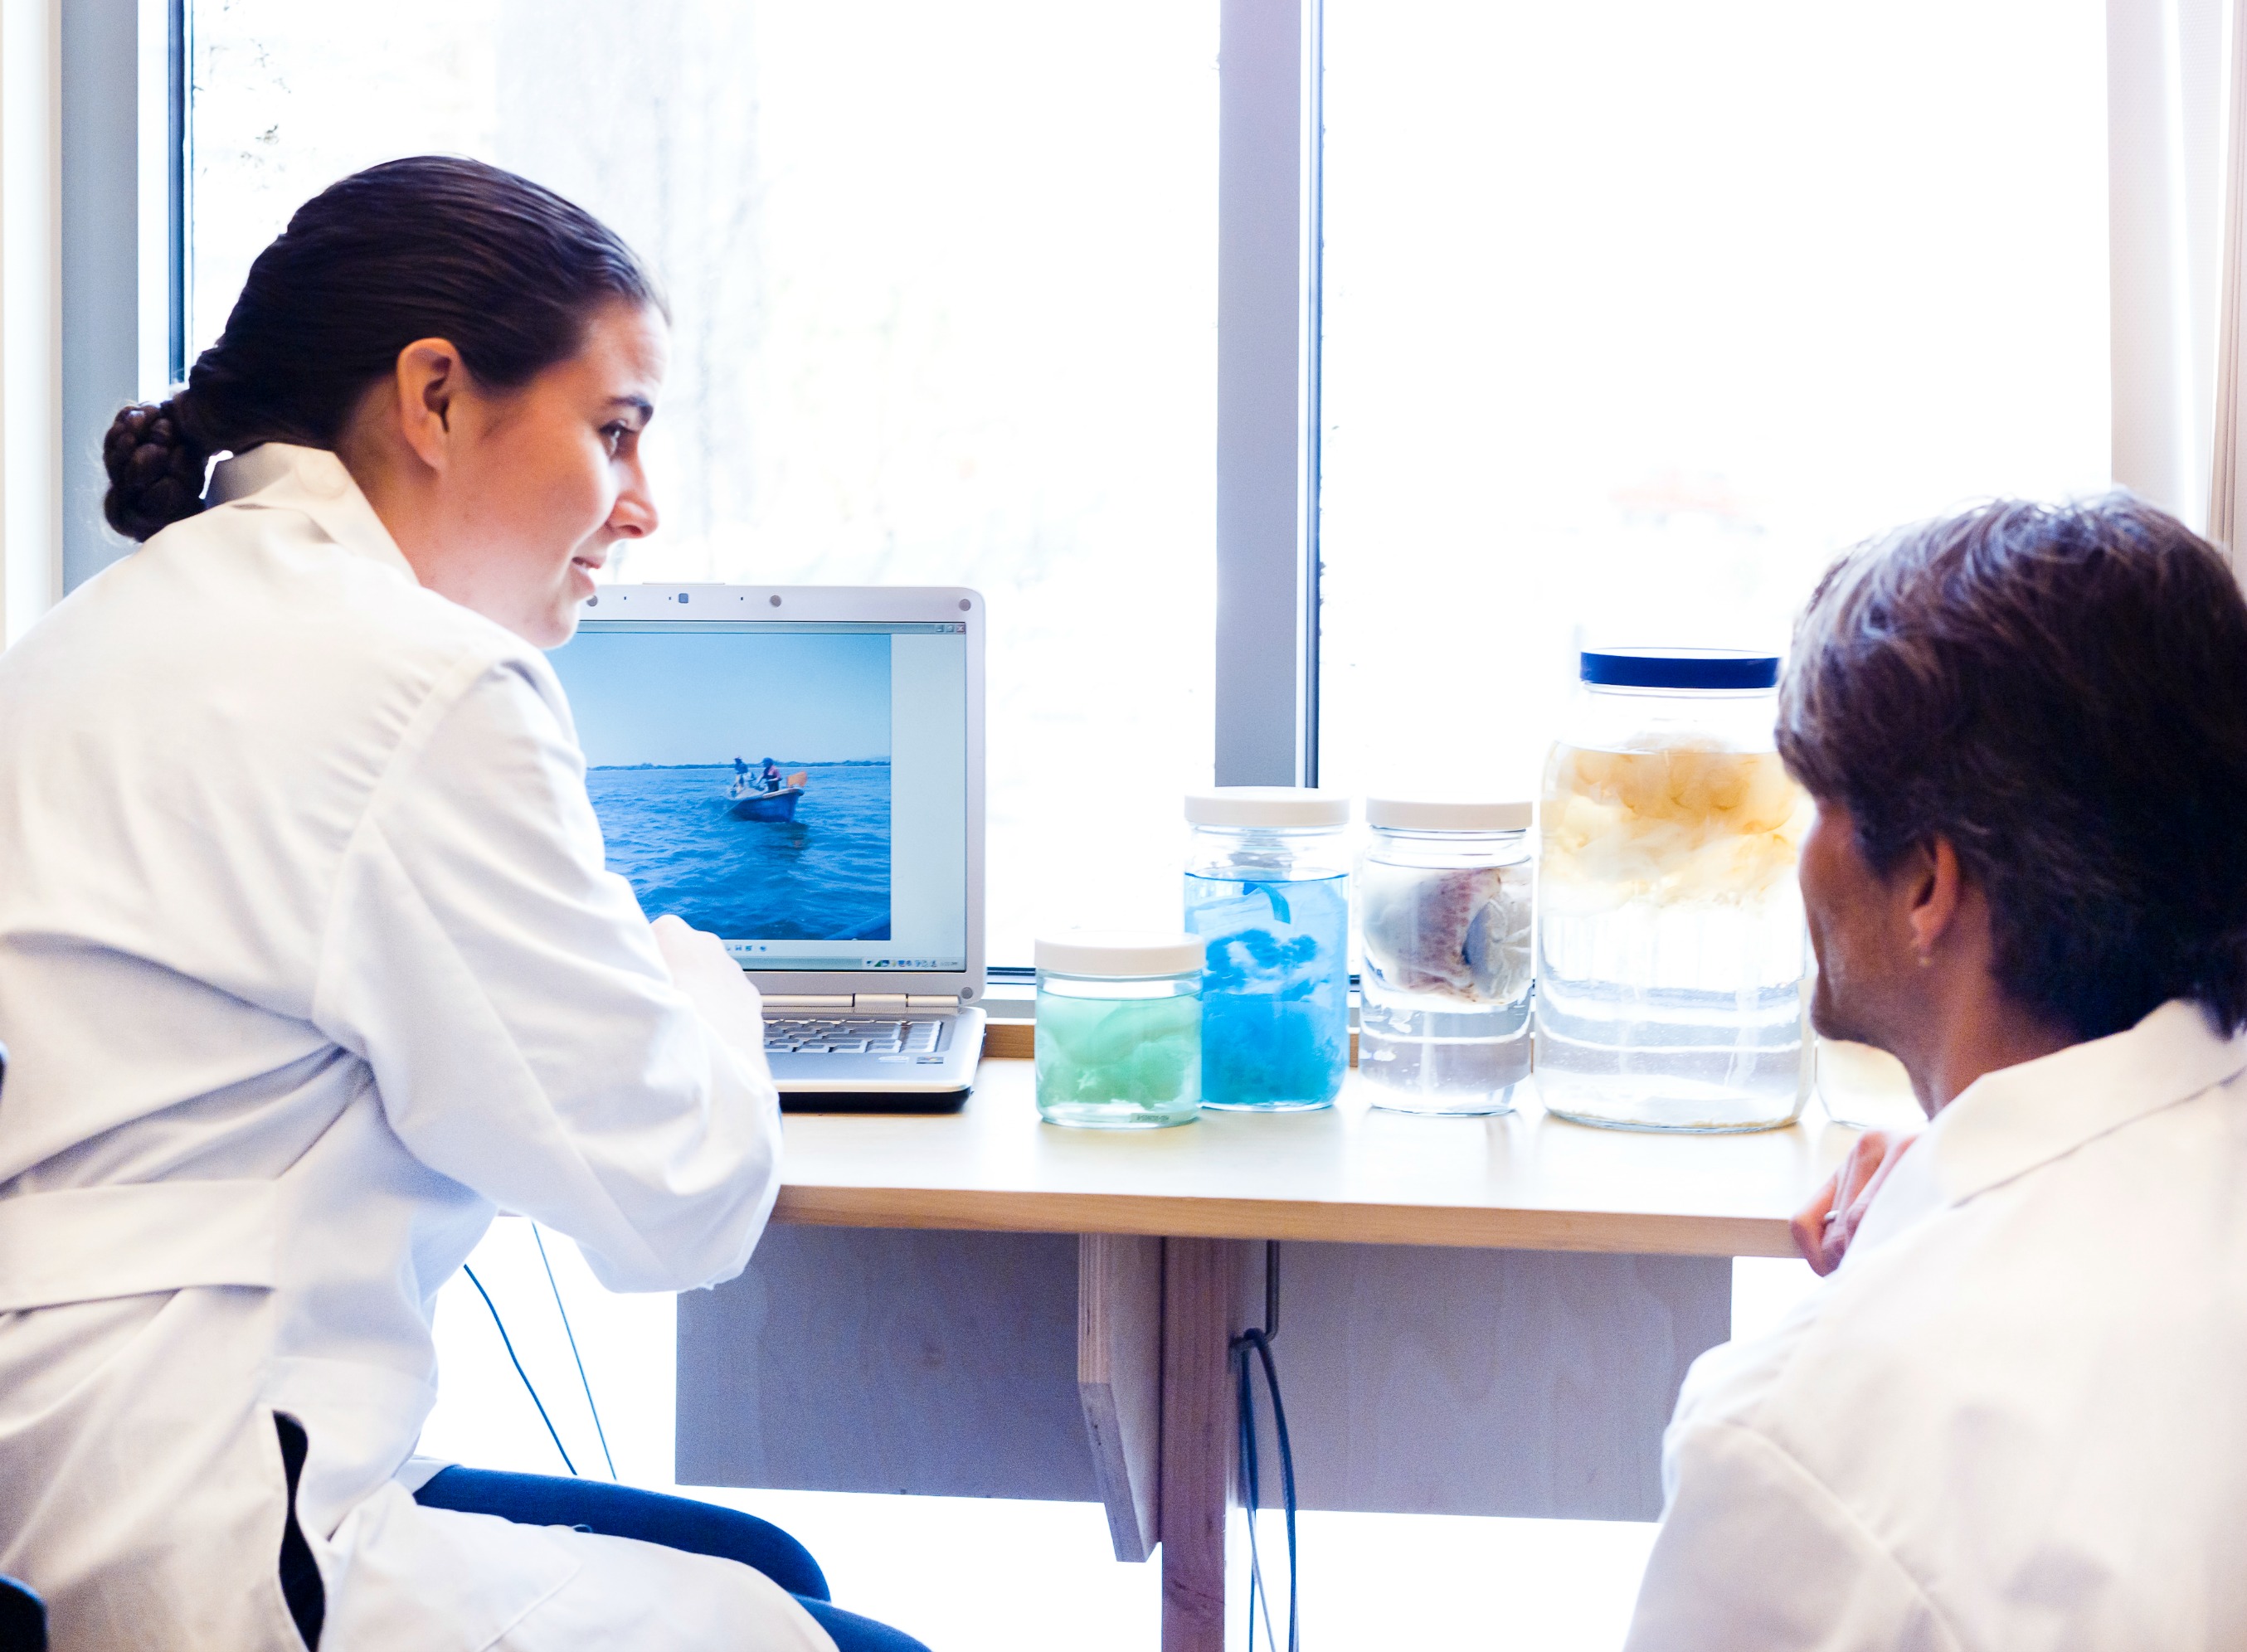 Two students in lab coats working on research